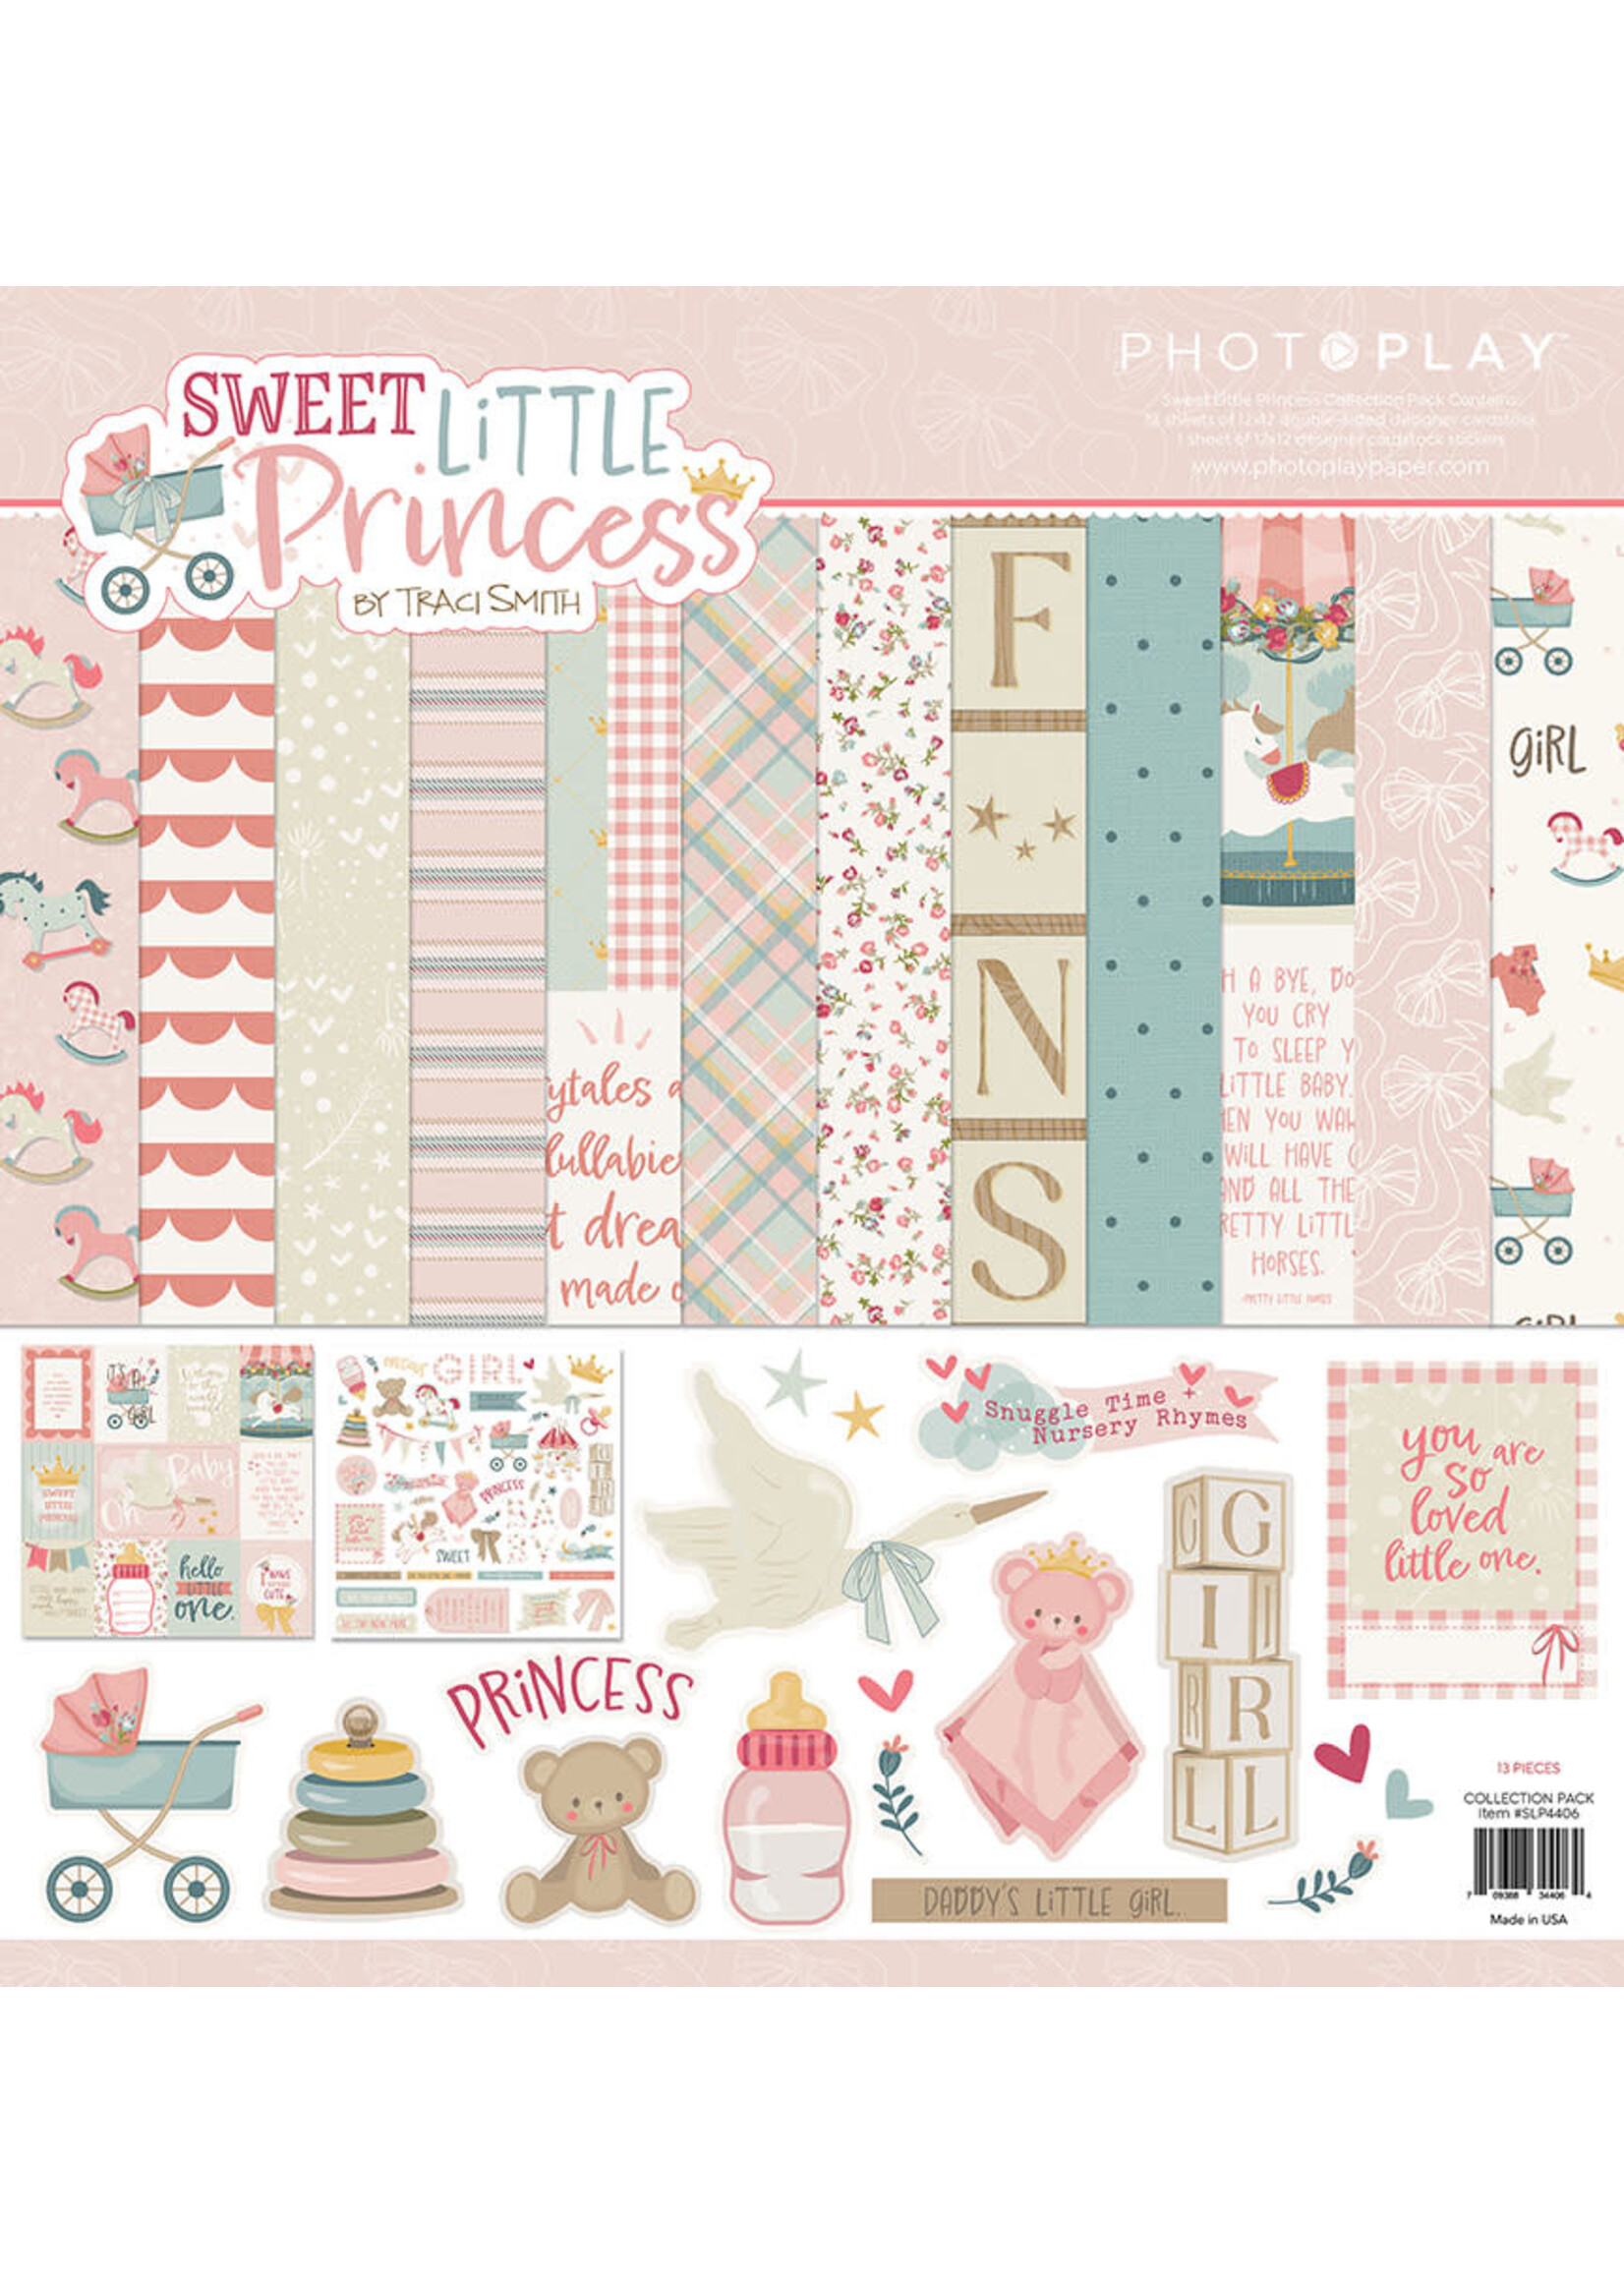 Photoplay Sweet Little Princess: Collection Pack